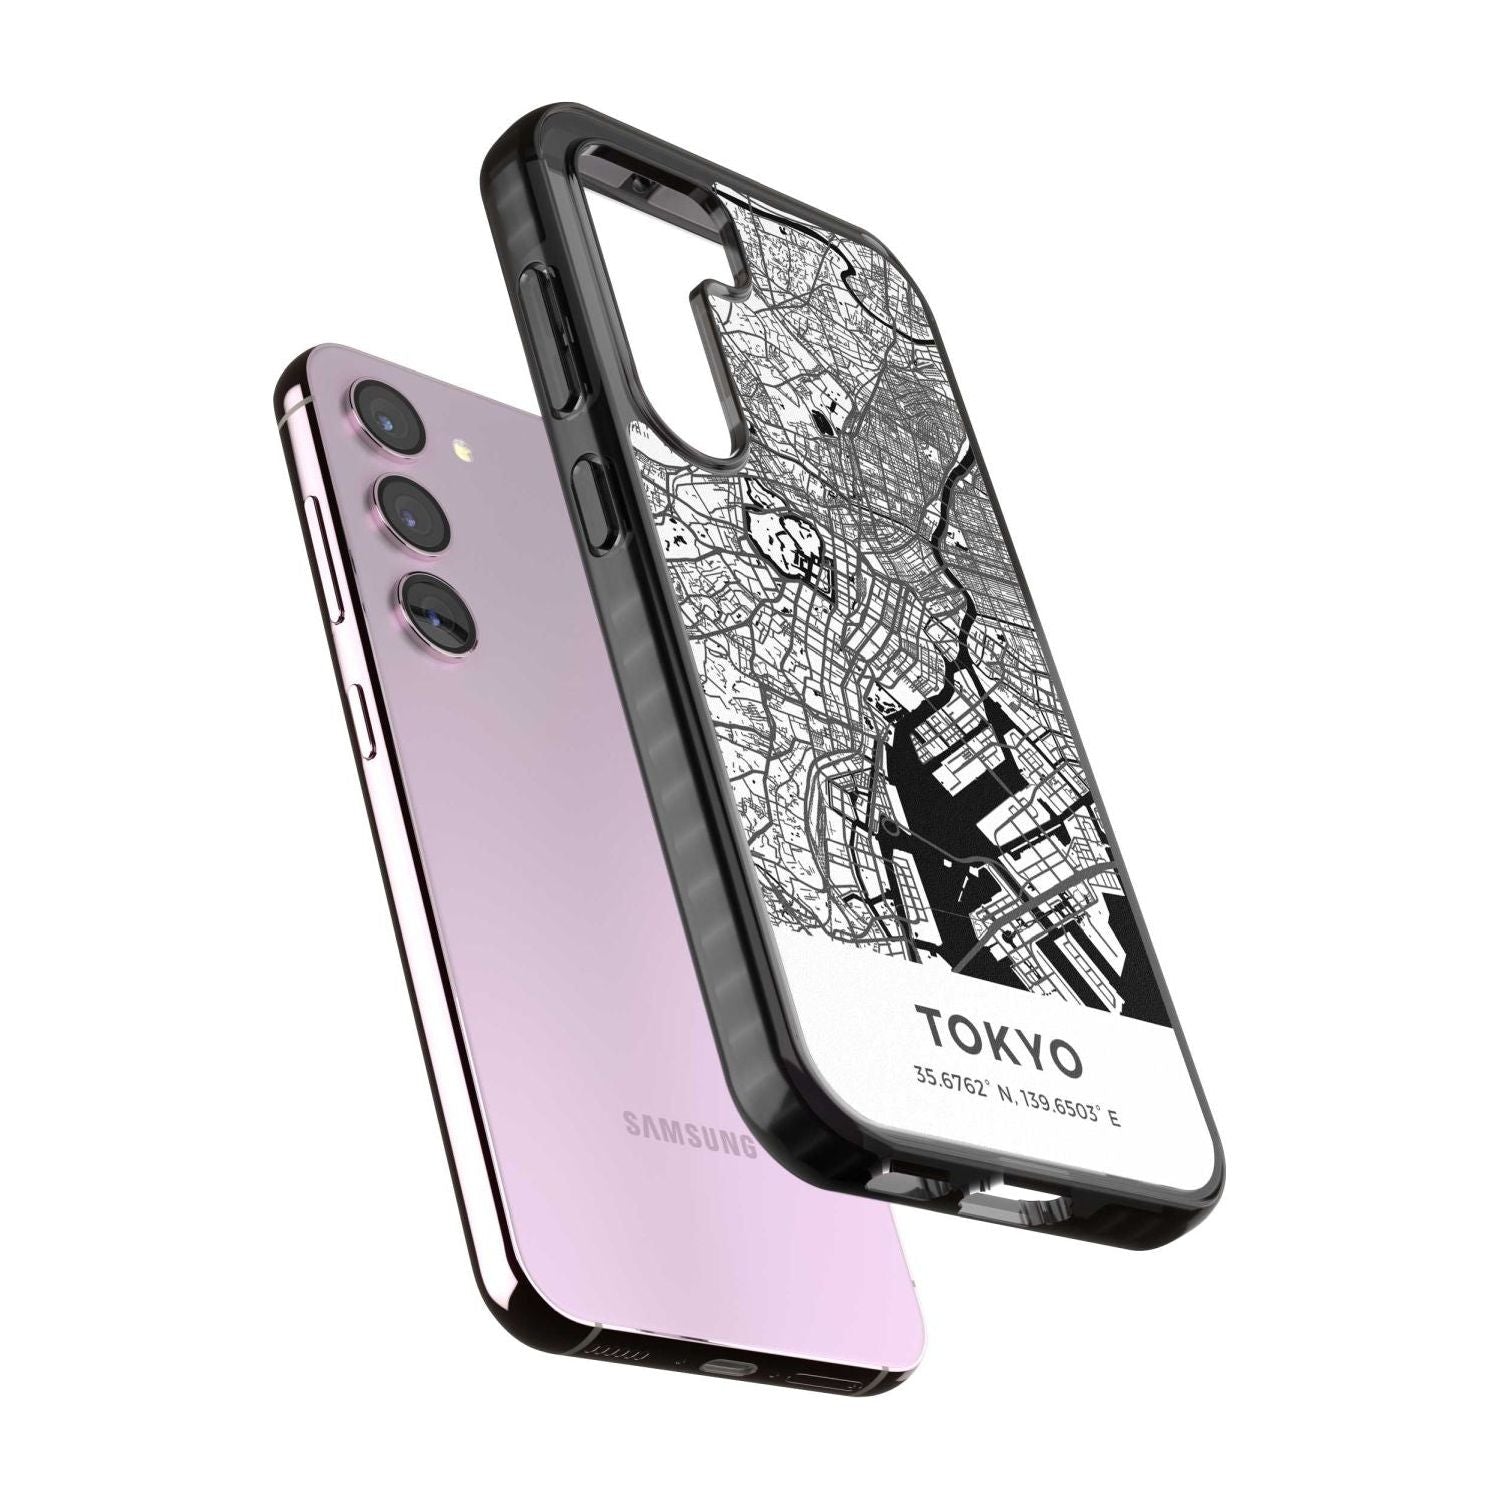 Map of Tokyo, Japan Phone Case iPhone 15 Pro Max / Black Impact Case,iPhone 15 Plus / Black Impact Case,iPhone 15 Pro / Black Impact Case,iPhone 15 / Black Impact Case,iPhone 15 Pro Max / Impact Case,iPhone 15 Plus / Impact Case,iPhone 15 Pro / Impact Case,iPhone 15 / Impact Case,iPhone 15 Pro Max / Magsafe Black Impact Case,iPhone 15 Plus / Magsafe Black Impact Case,iPhone 15 Pro / Magsafe Black Impact Case,iPhone 15 / Magsafe Black Impact Case,iPhone 14 Pro Max / Black Impact Case,iPhone 14 Plus / Black I